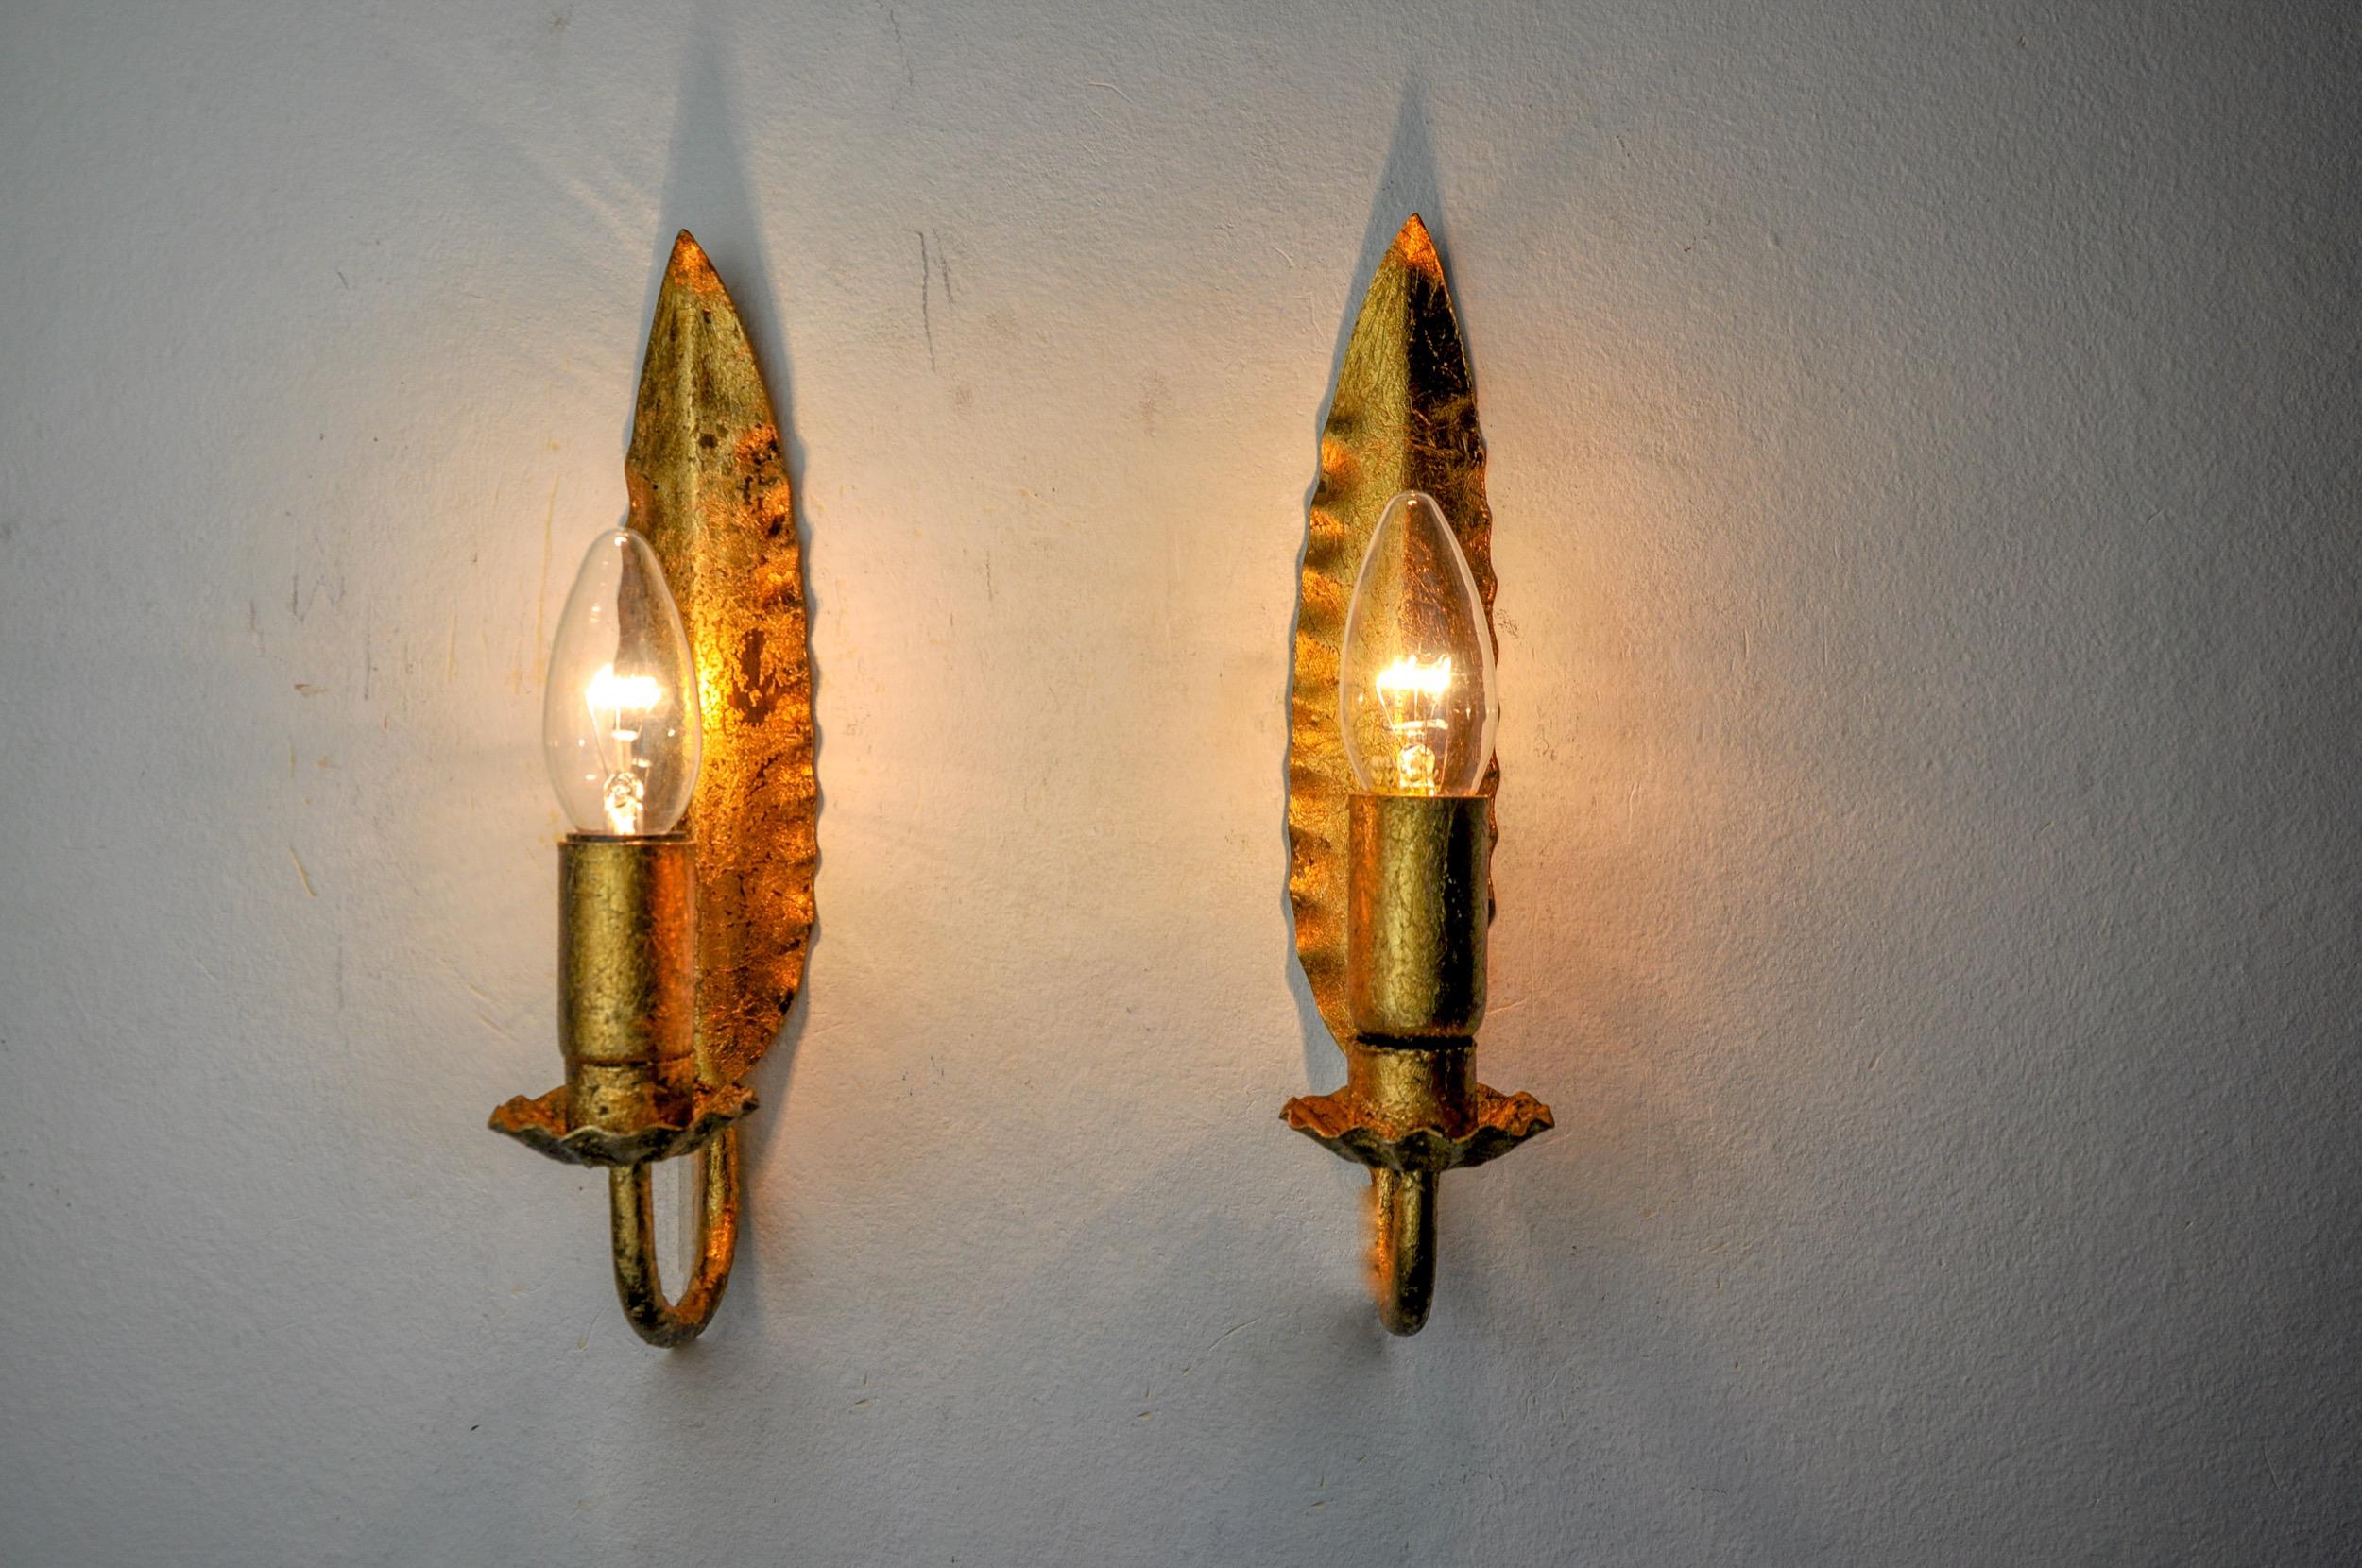 Very beautiful and rare pair of midcentury wall lights in the shape of a leaf designated and produced by Ferro Arte in Spain in the 1960s, in metal and made with gold leaf. Rare design object that will illuminate your interior wonderfully.